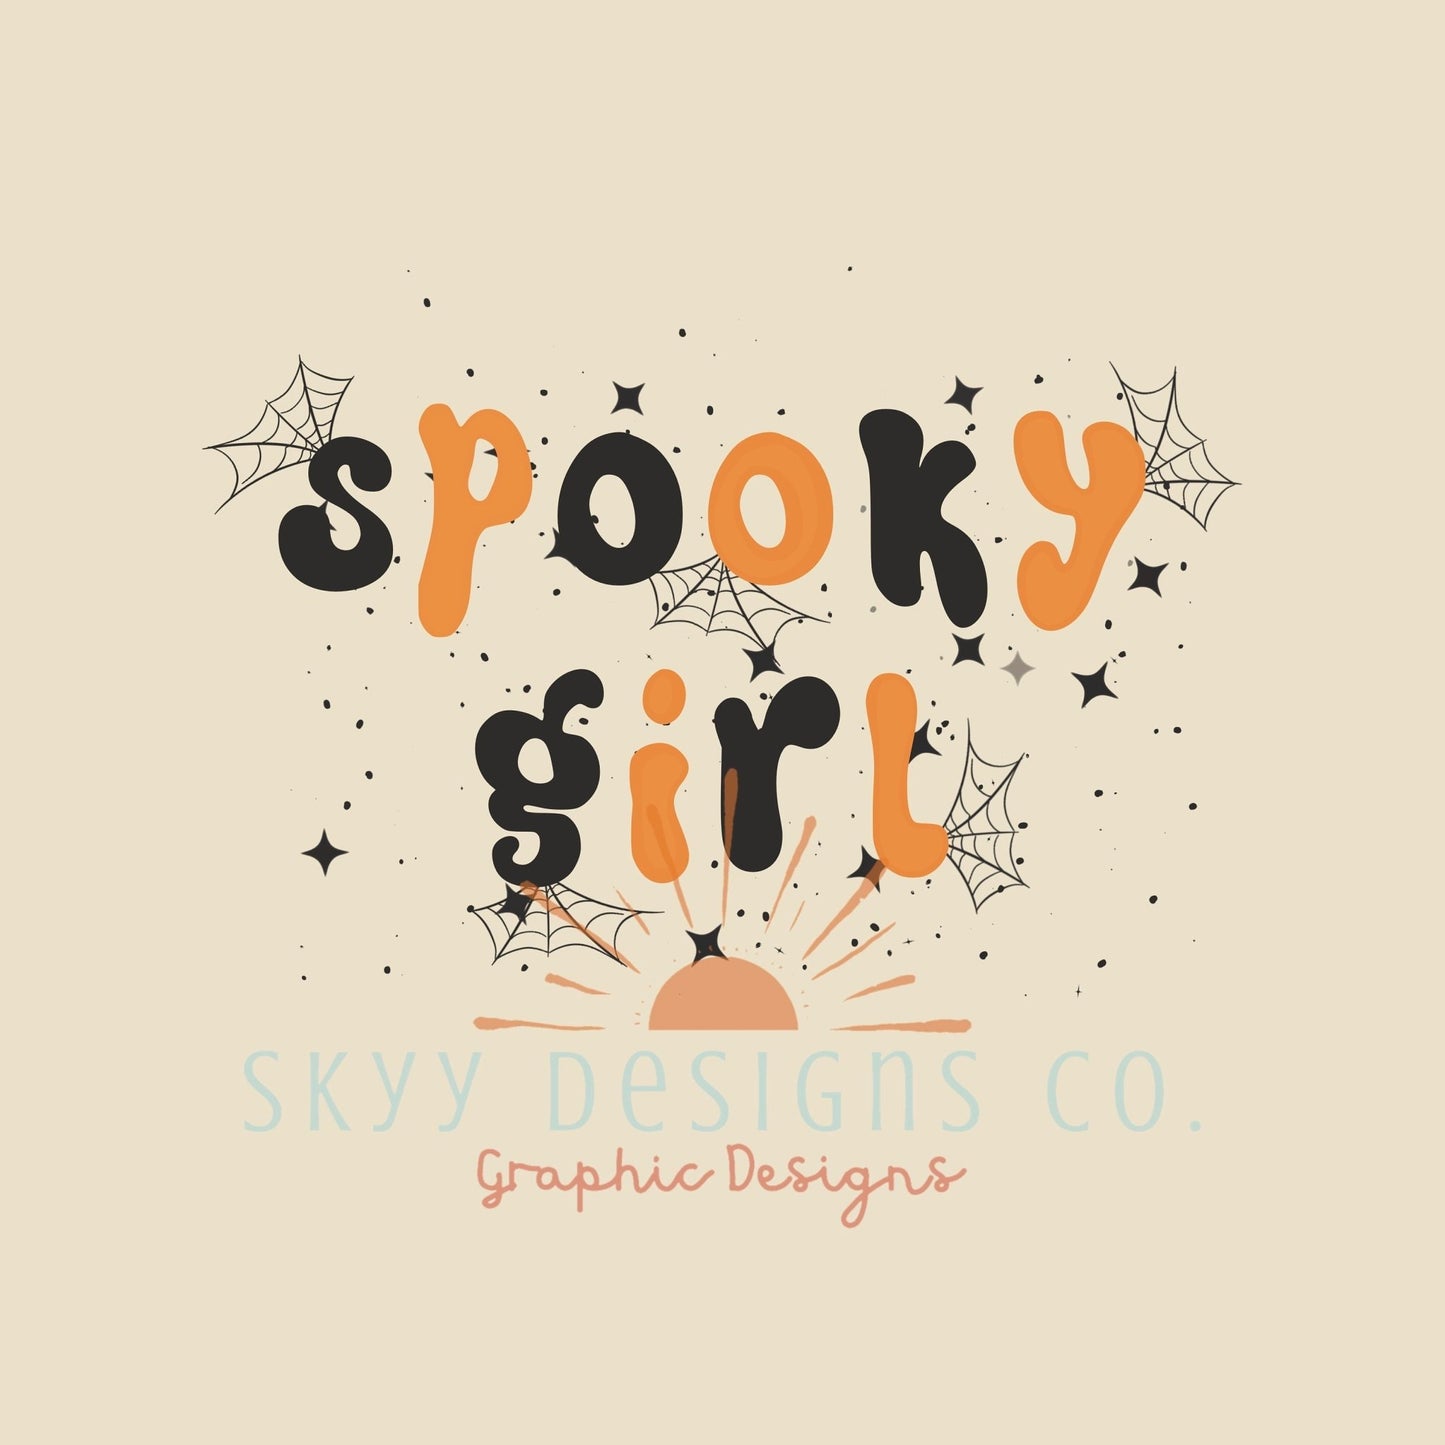 Spooky sibling png, Png bundle Halloween, Spooky Babe Png, Kids Png designs, Halloween Png for t shirts, Matching Png Boy and Girl - SkyyDesignsCo